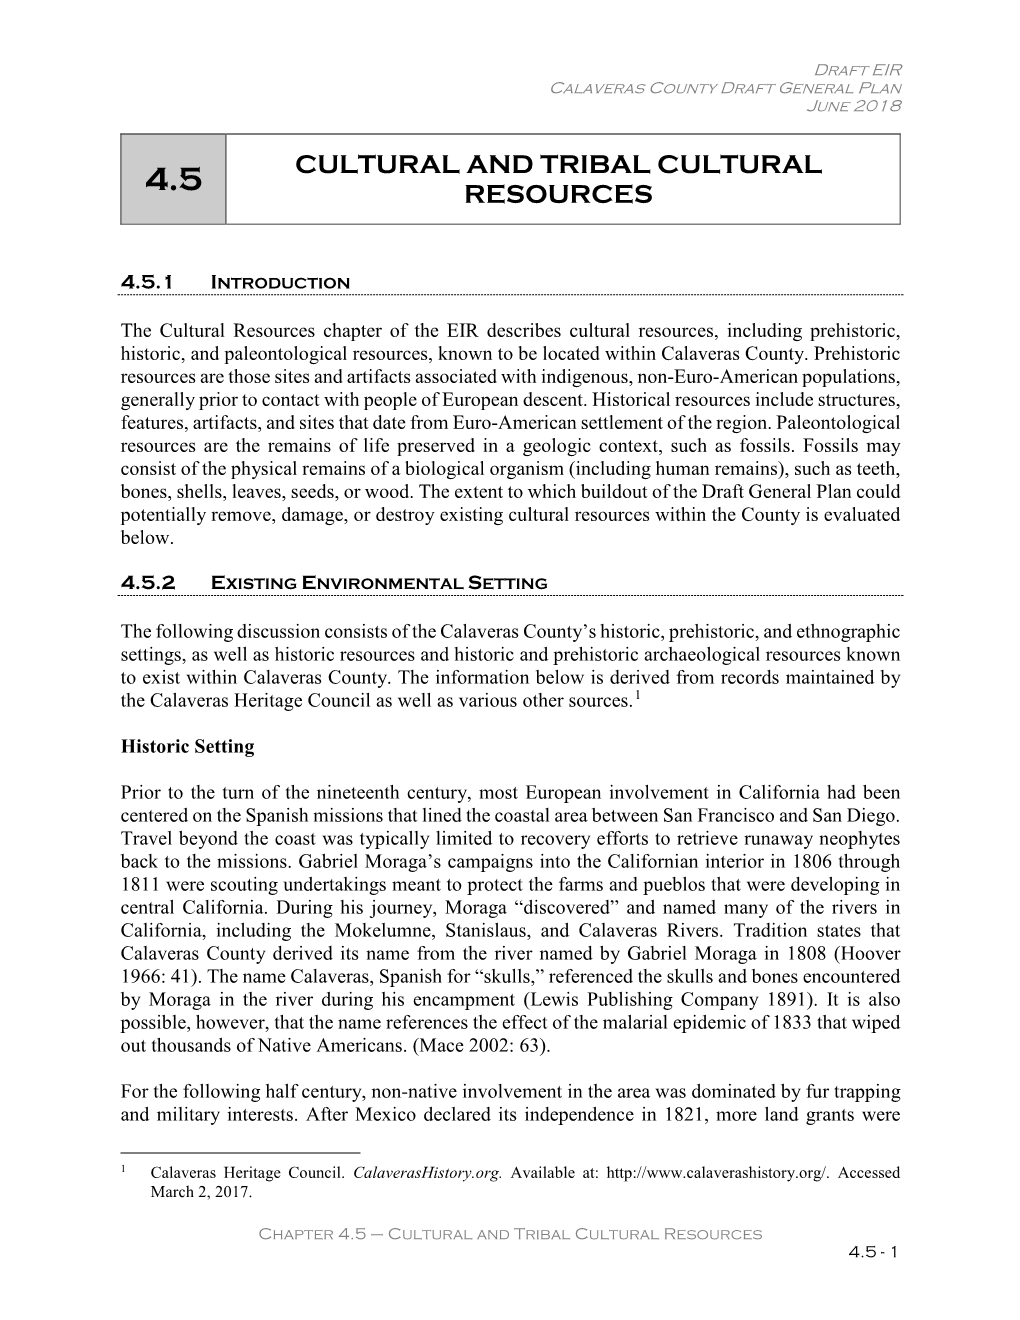 Cultural and Tribal Cultural Resources 4.5 - 1 Draft EIR Calaveras County Draft General Plan June 2018